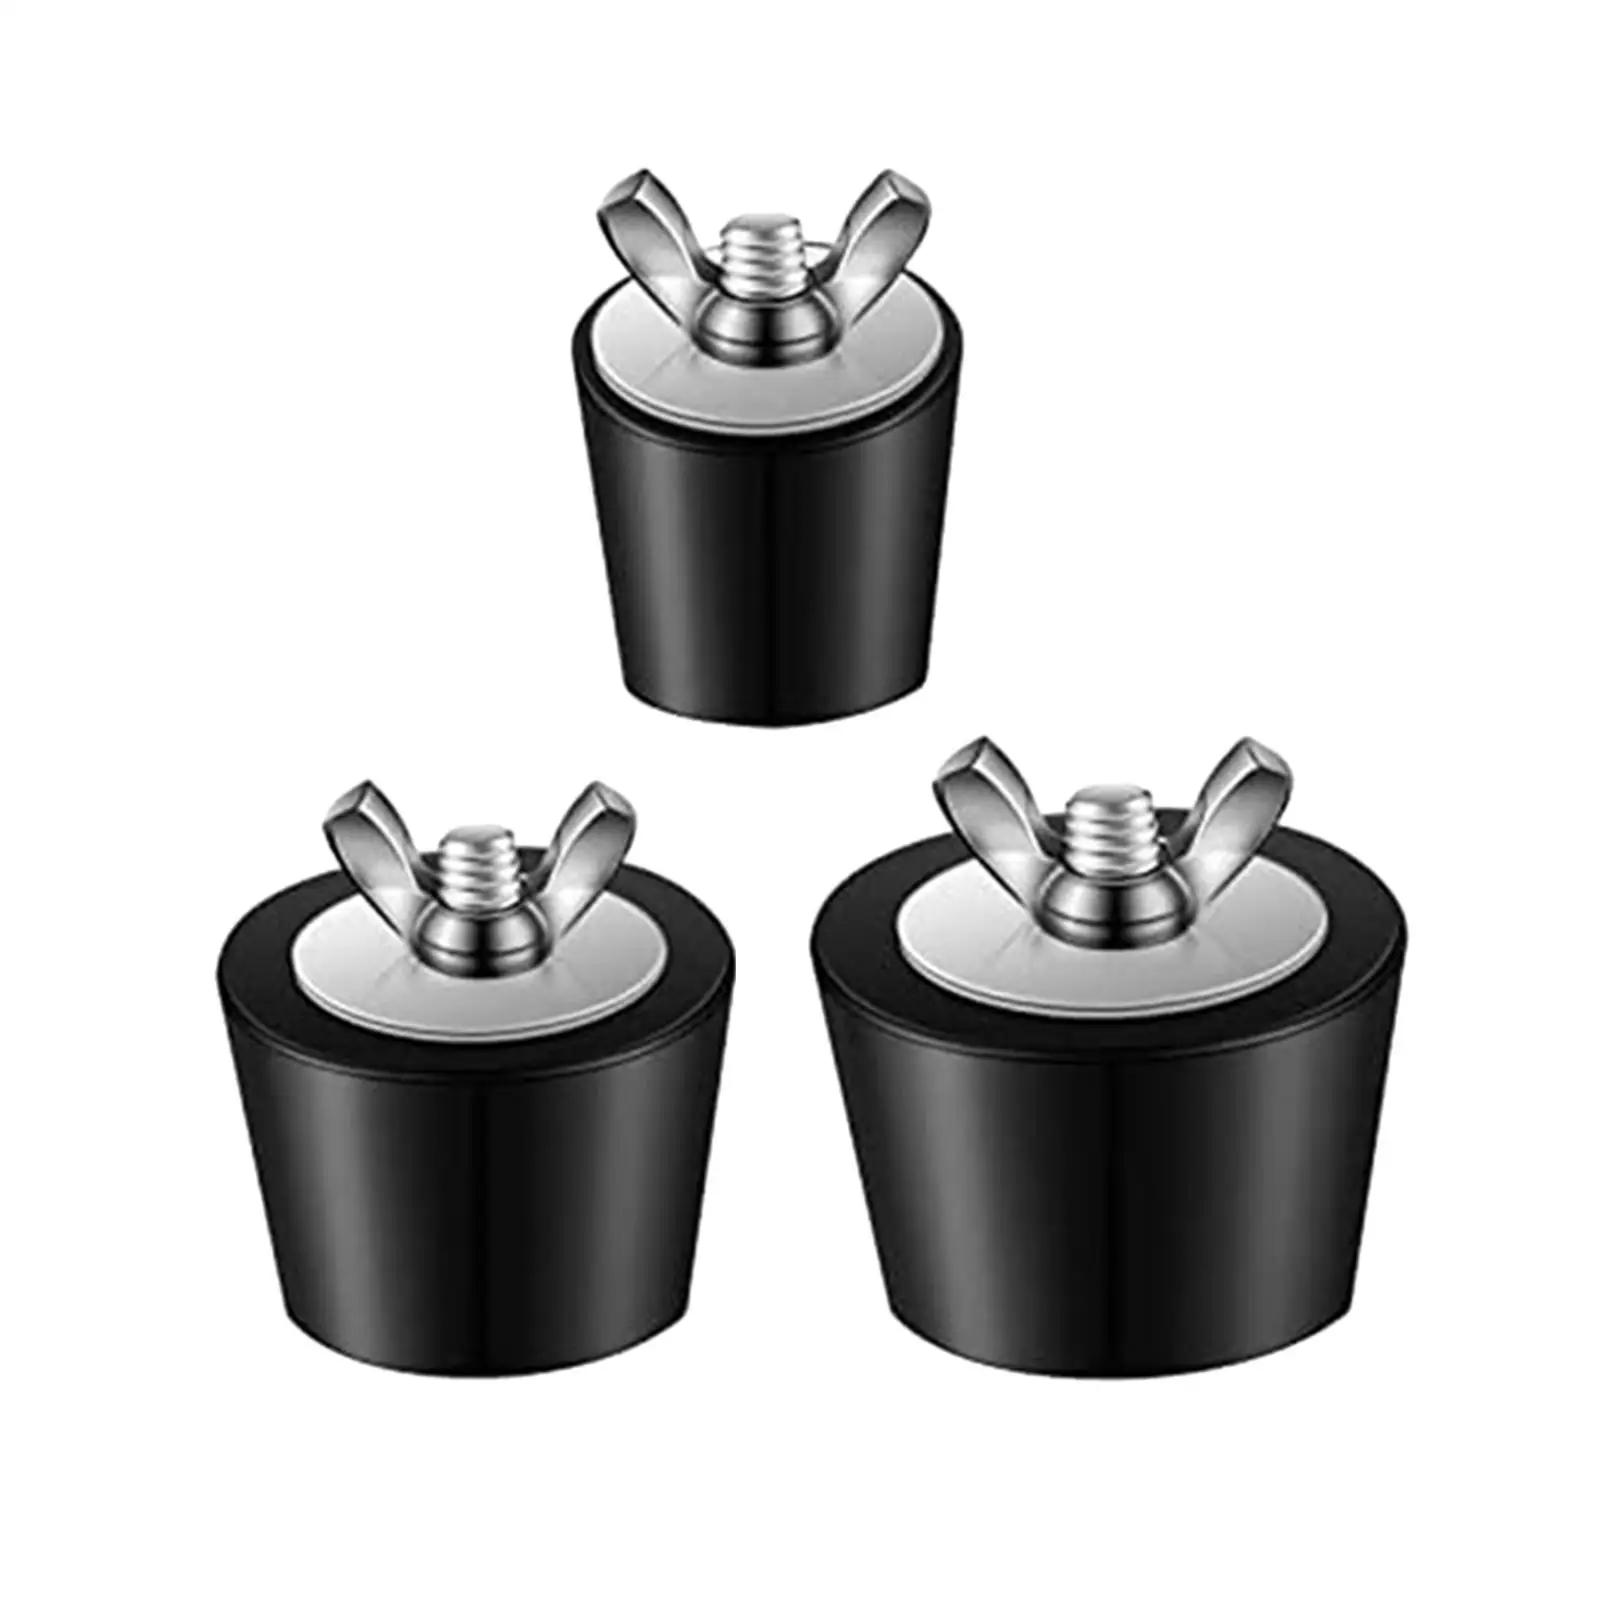 3x 25mm/38mm/51mm Pool Winterizing Plug Fitting Pool Parts Durable Replace